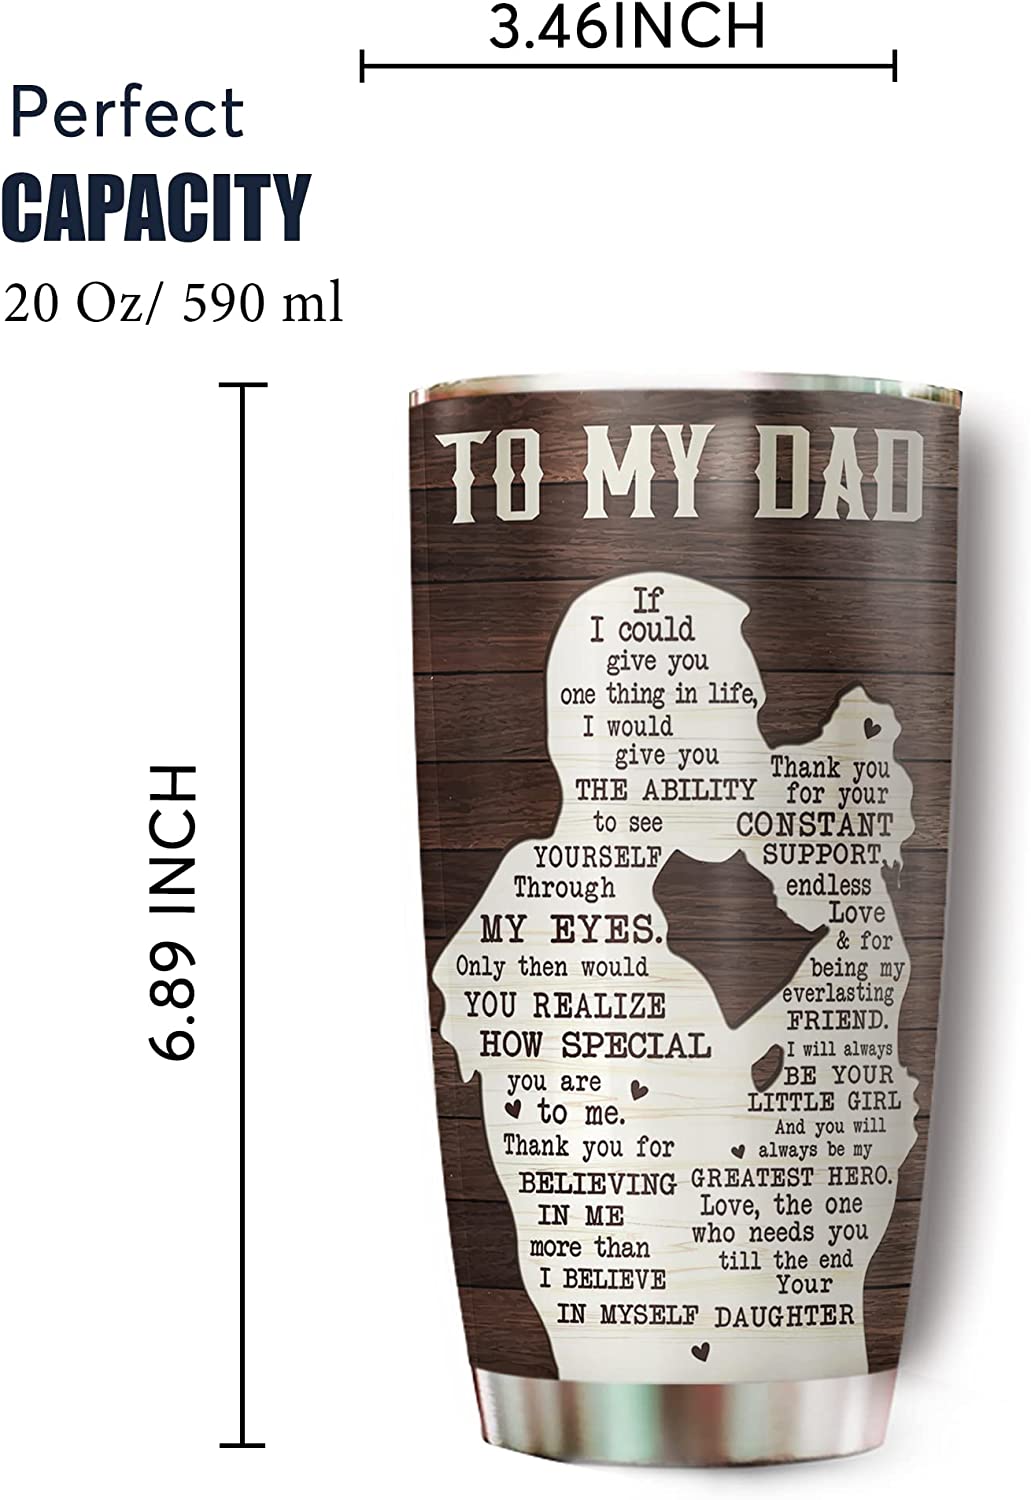 To My Dad Birthday Gifts From Daughter - Best Dad Ever Travel Stainless Steel Tumbler 20oz With Lid, Thank You Gifts For Dad On Father's Day, Valentine's Day, Christmas Novelty Gifts From Daughter Cup